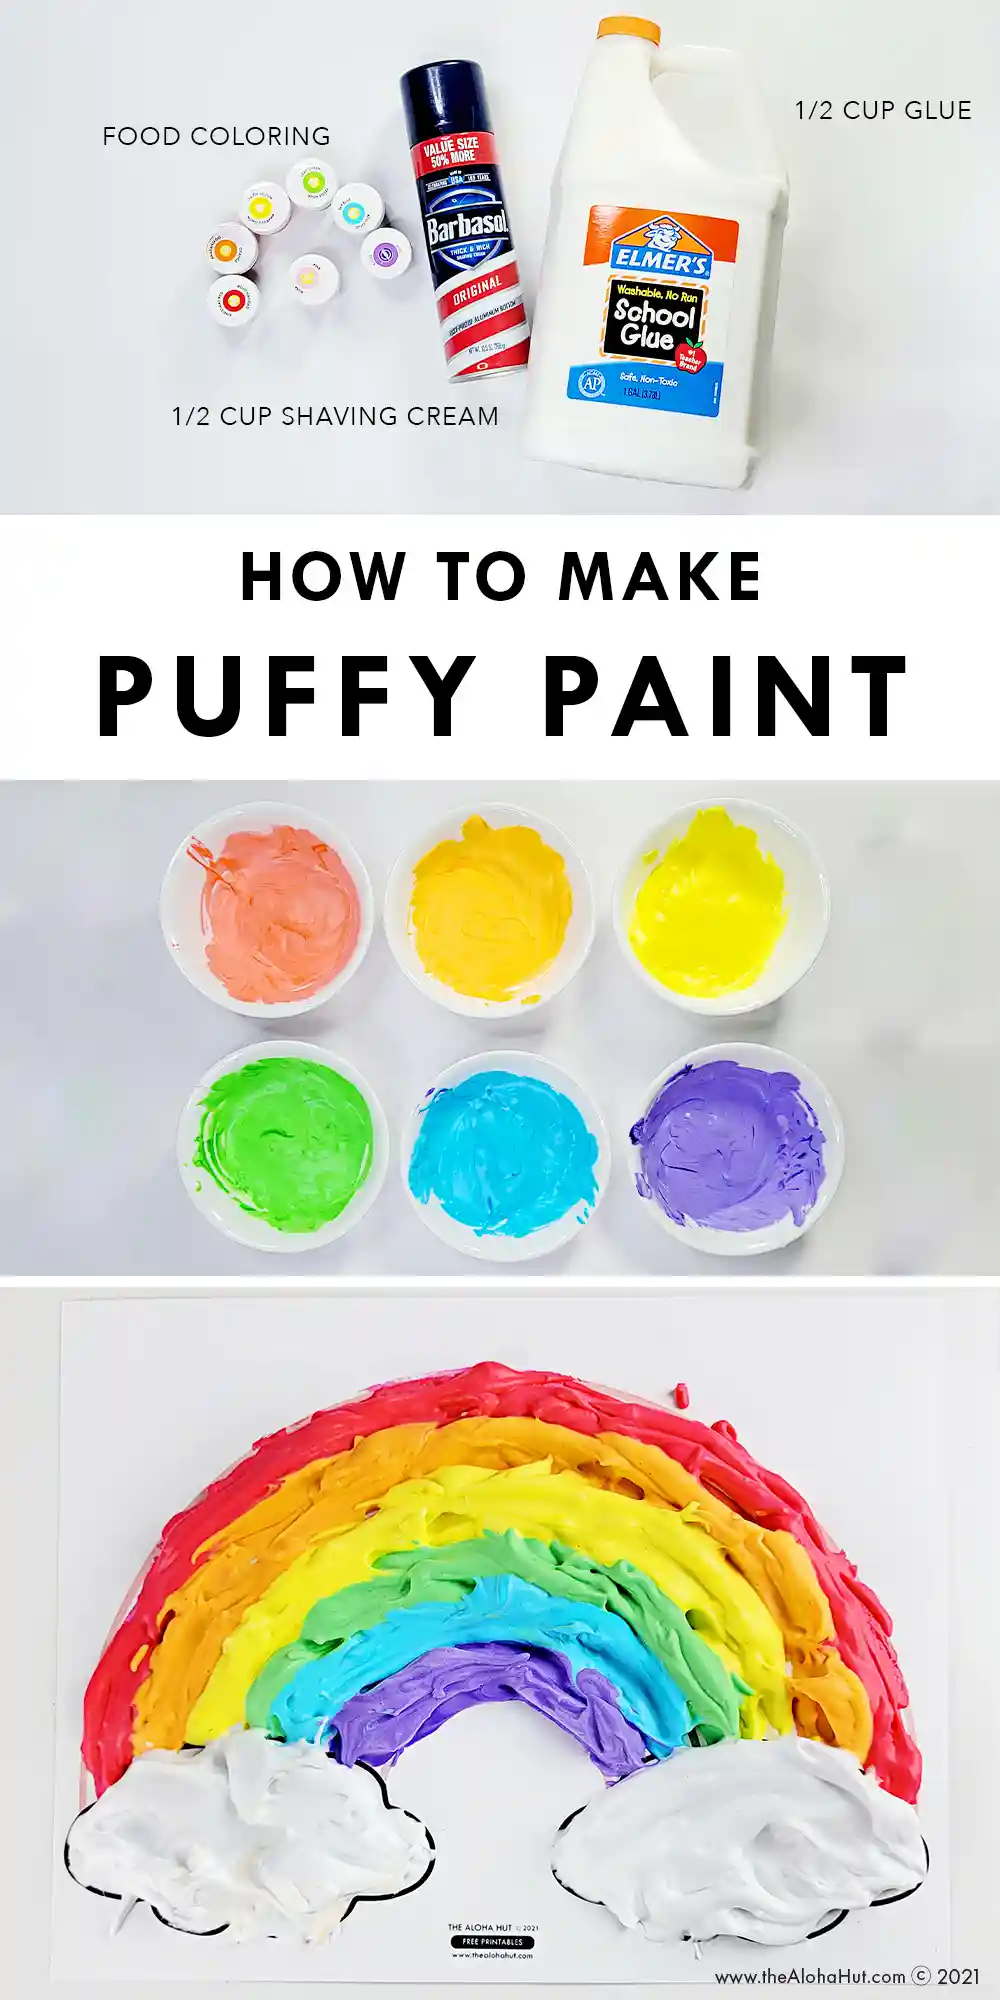 Step by step instrutions for how to make puffy paint with glue, shaving cream, and food coloring. Puffy paint is such an easy and fun kids activity. Use our printable playdough mats with your homemade DIY puffy paint for more guided, sensory play.